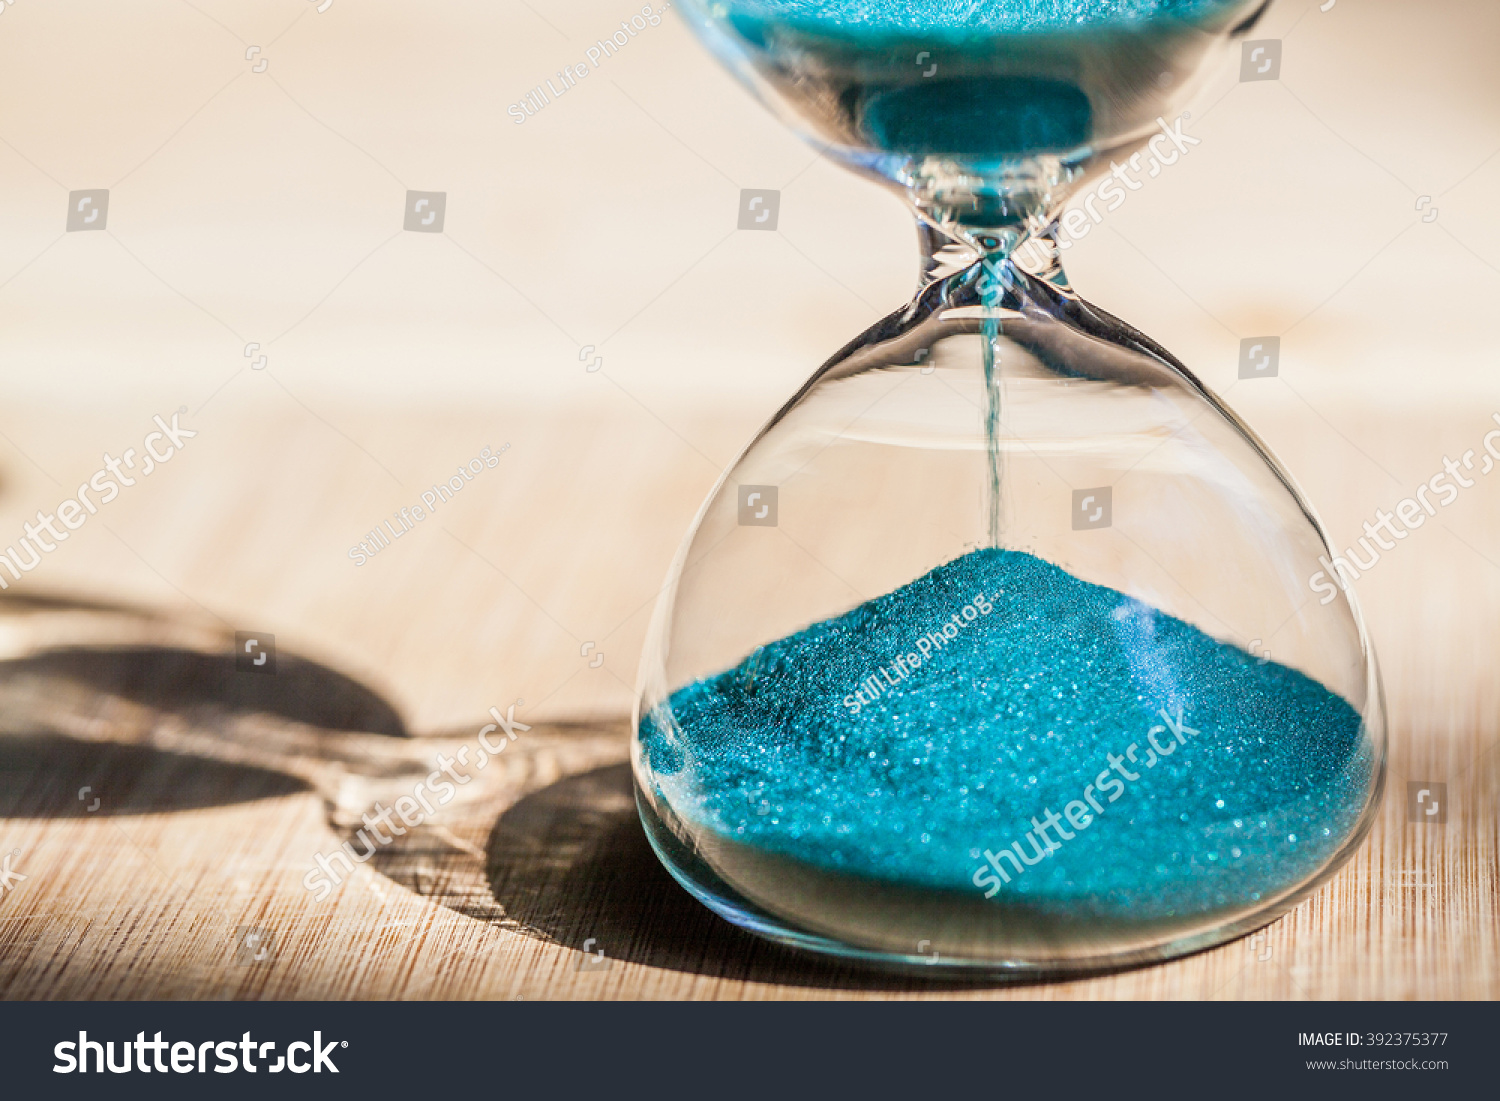 Sand Running Through The Bulbs Of An Hourglass Measuring The Passing Time In A ...1500 x 1101